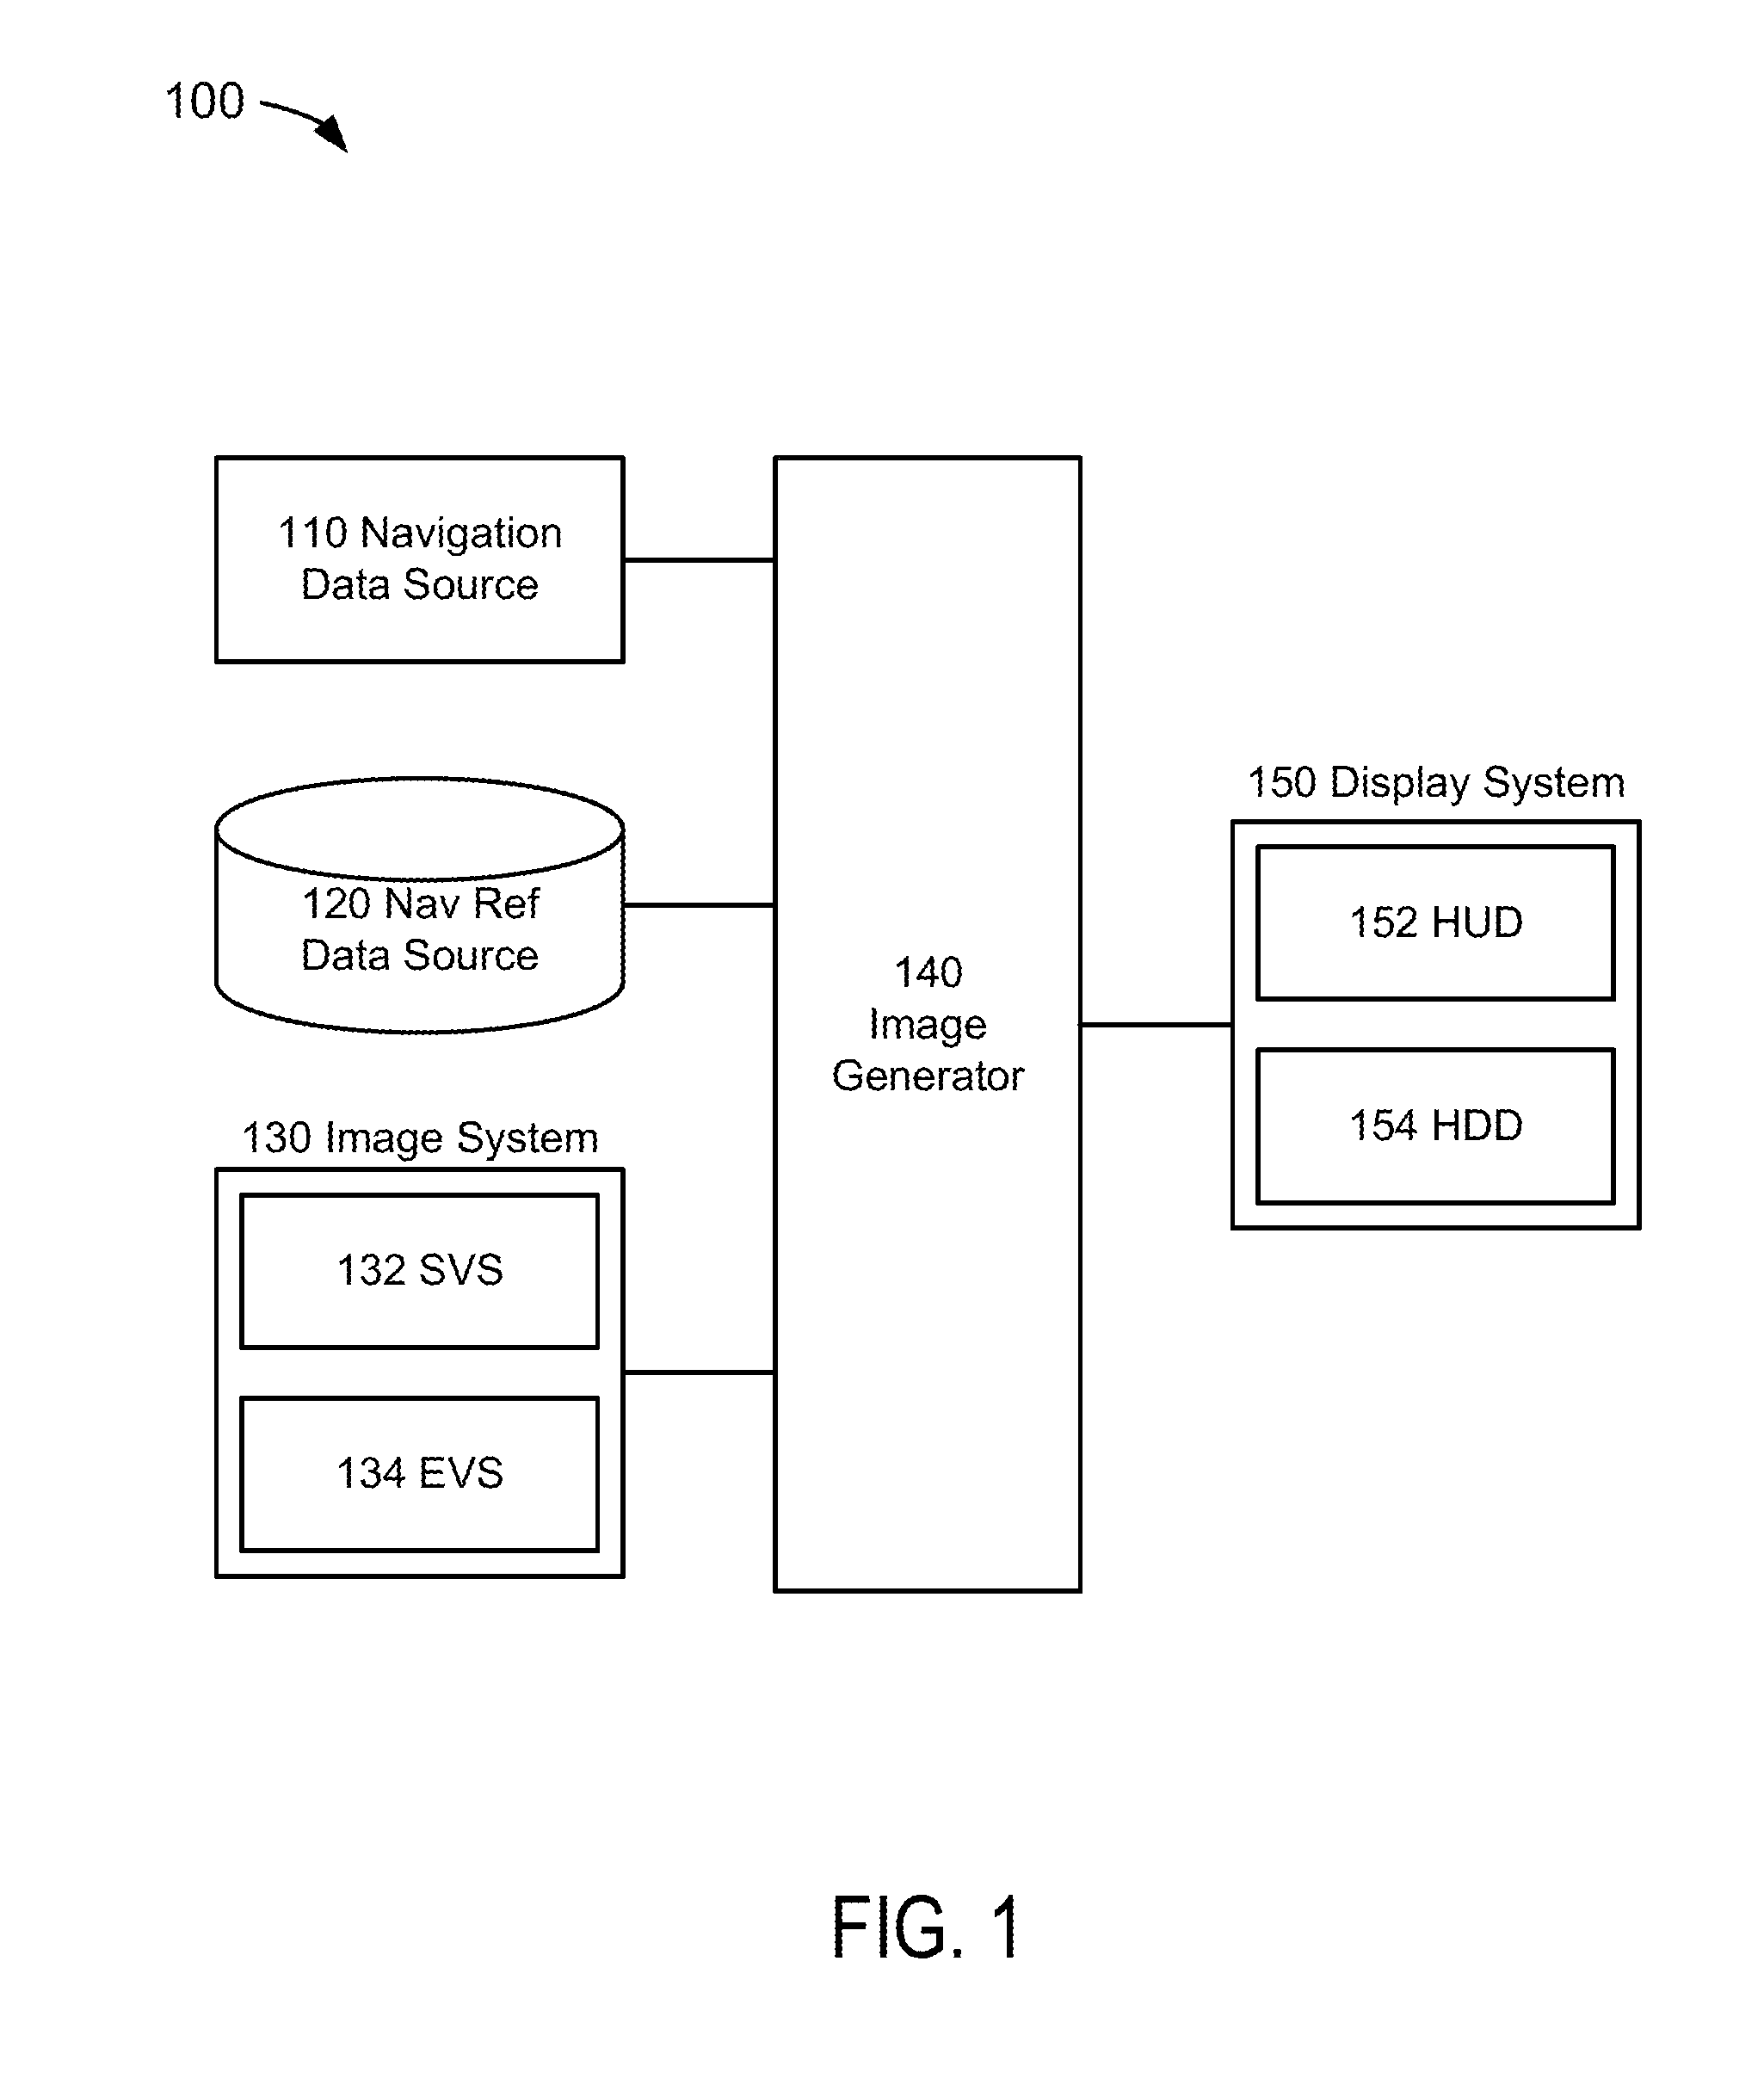 Visual aid generating system, device, and method